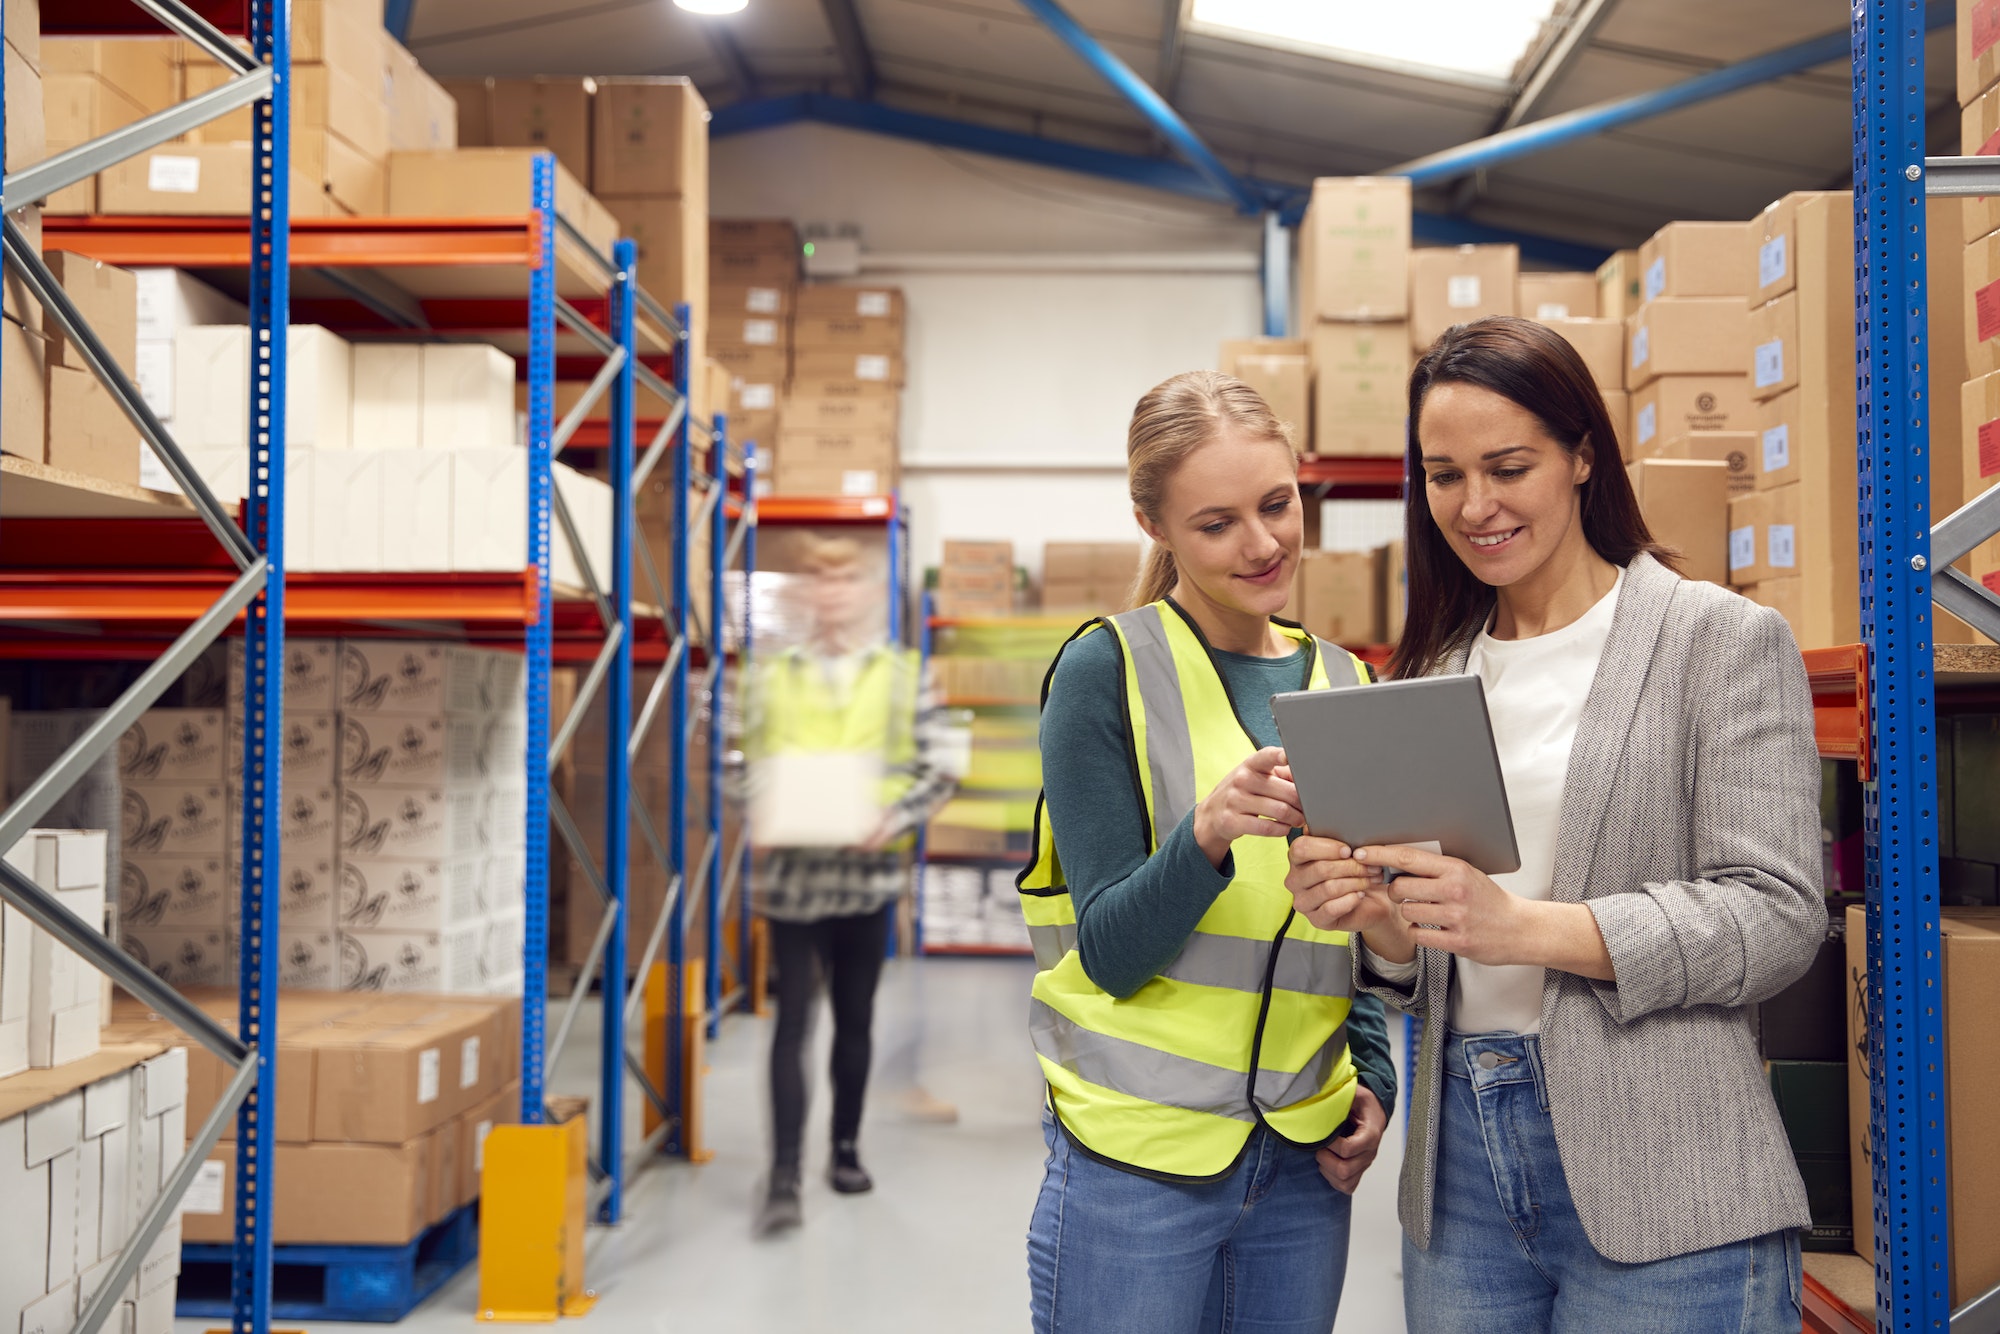 Manager Using Digital Tablet With Female Intern Inside Busy Warehouse Facility